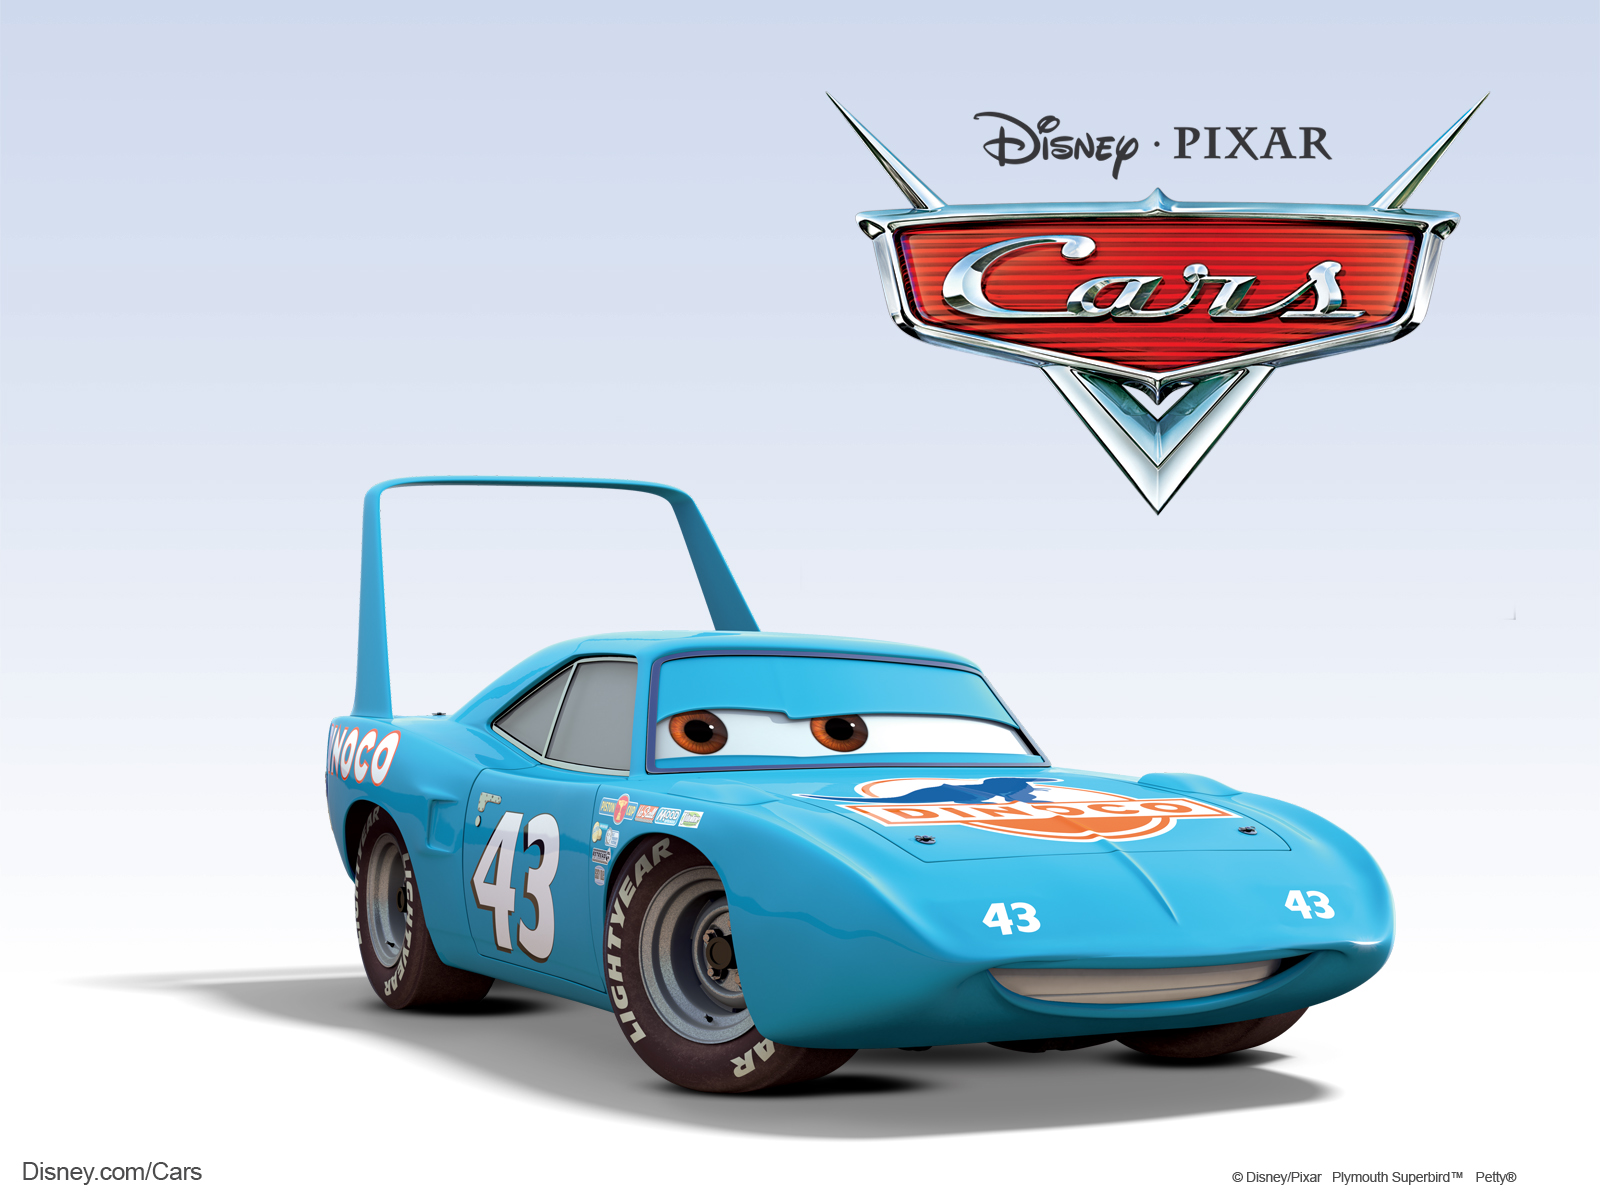 King the Race Car from Disney Pixar Movie Cars wallpaper   Click